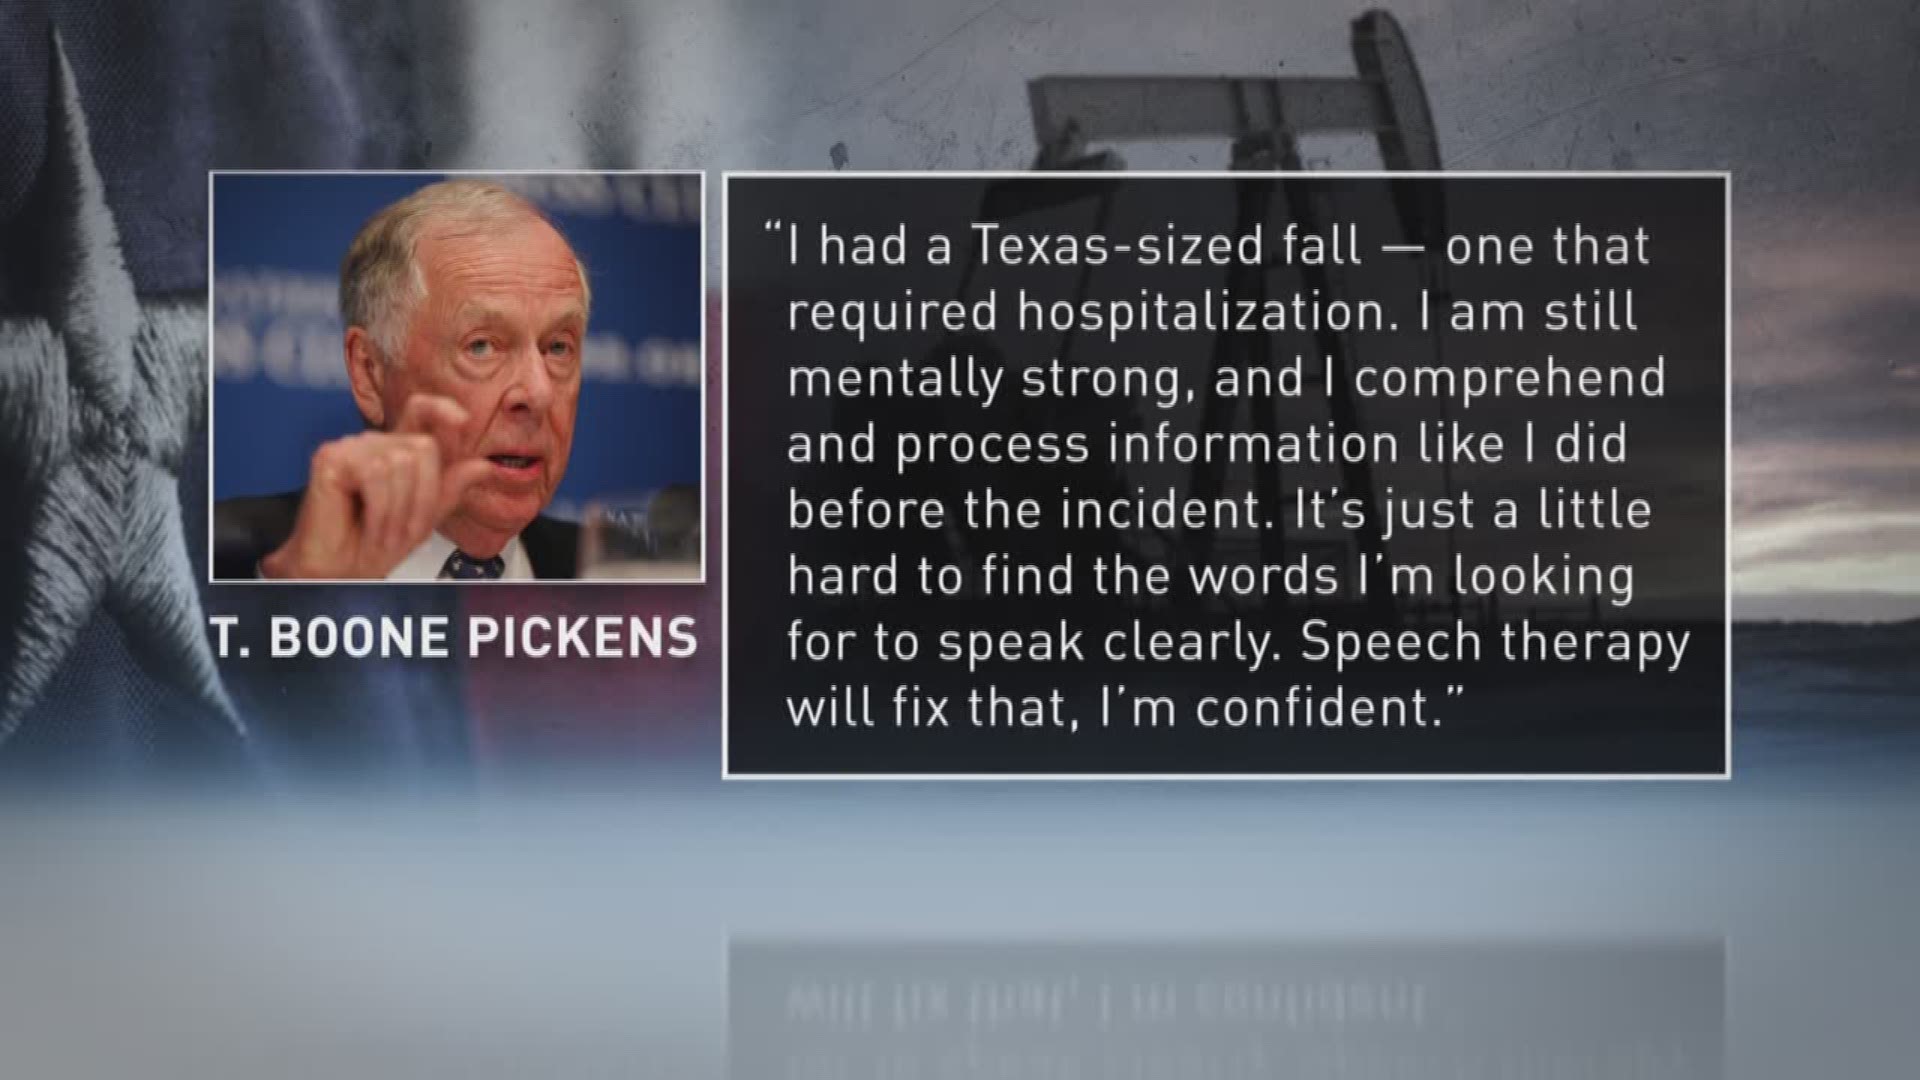 T. Boone Pickens: 'My health is in decline'